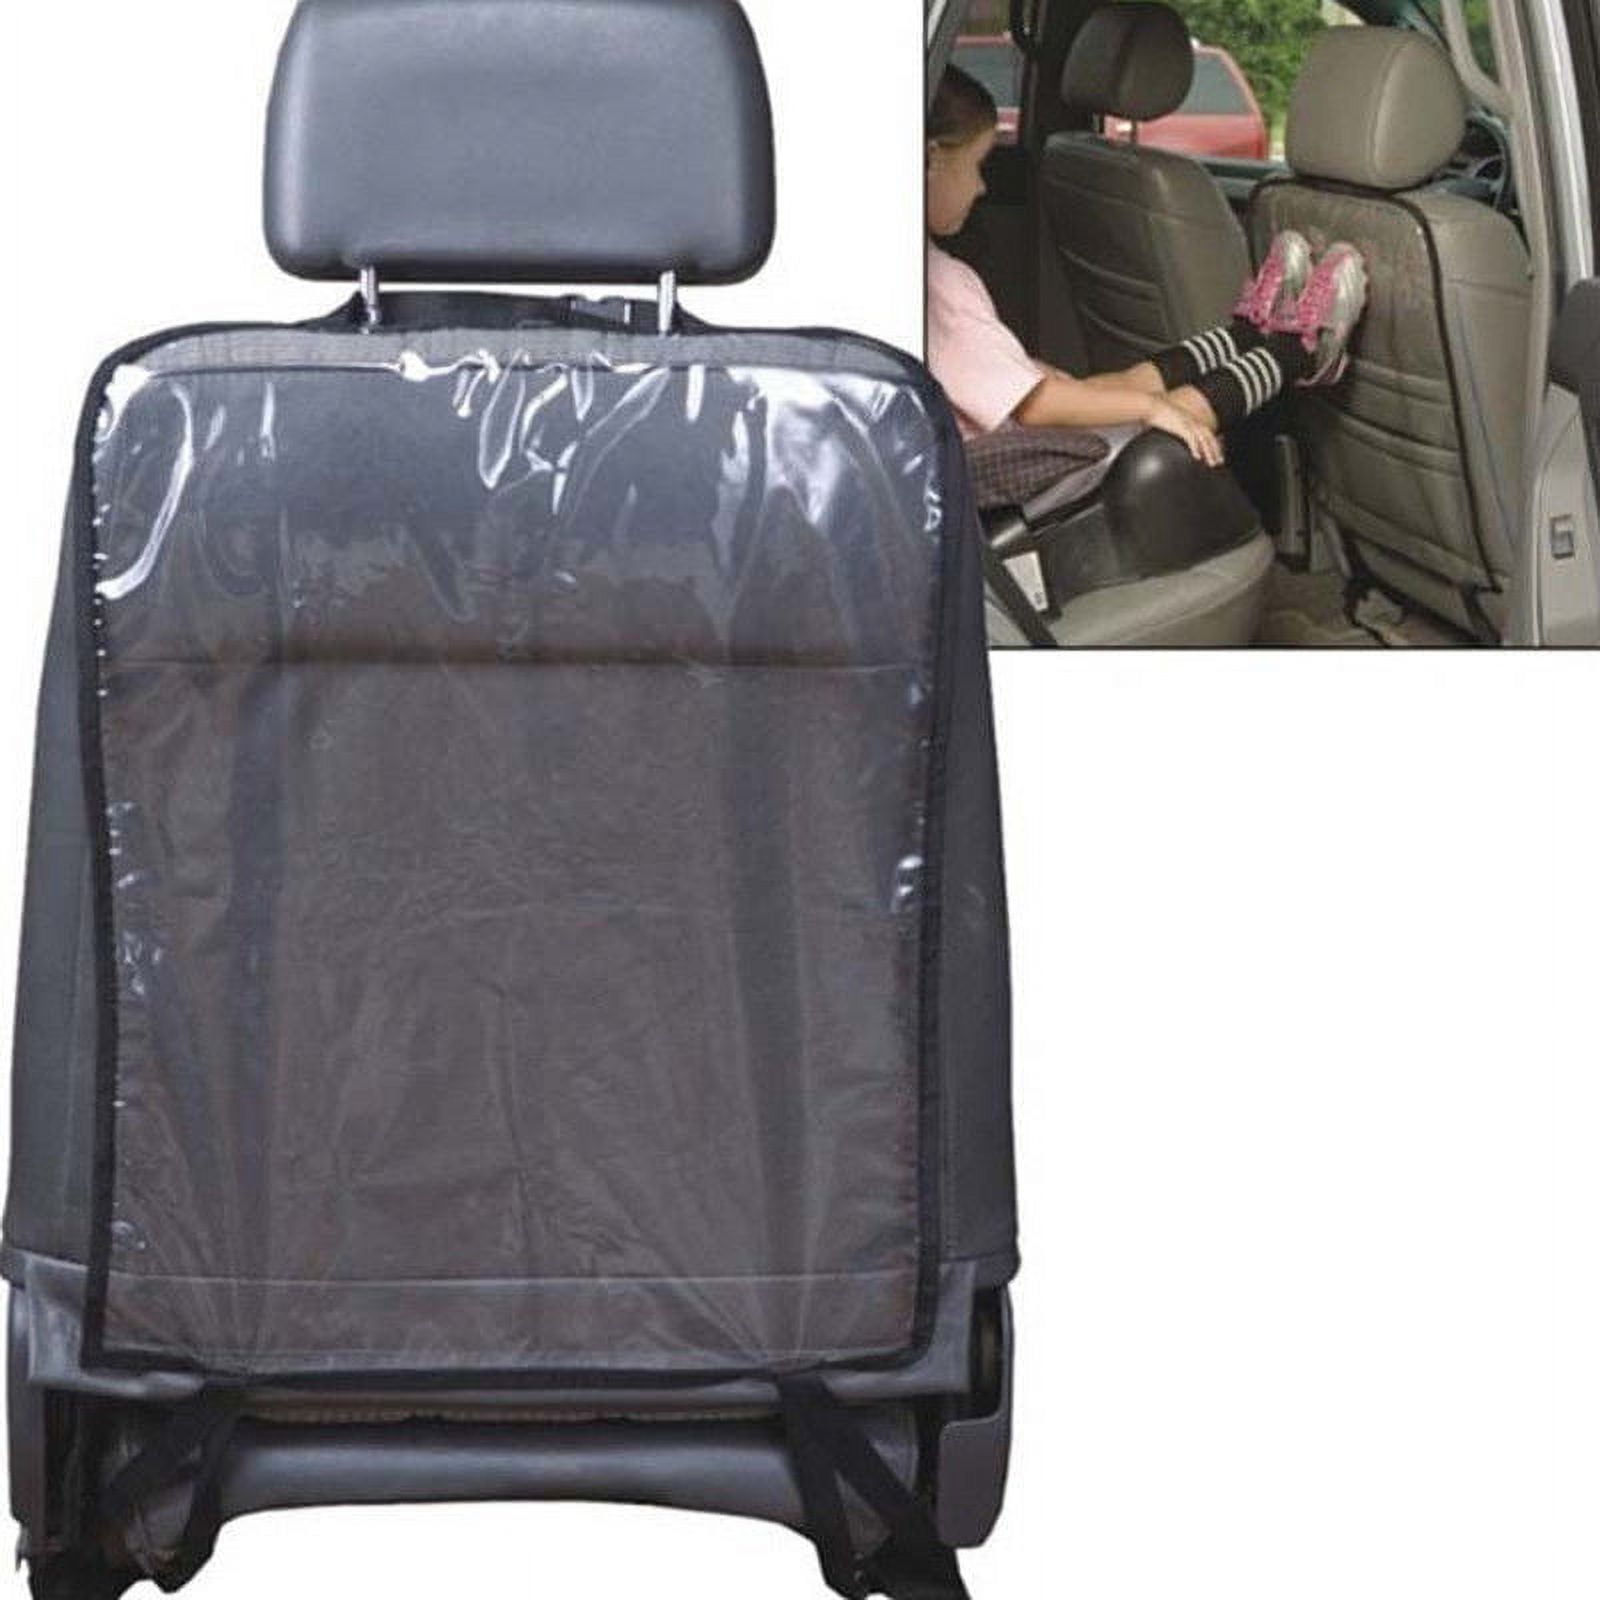 Anti Stepped Dirty Auto Clear Car Seat Back Cover Protector Kids